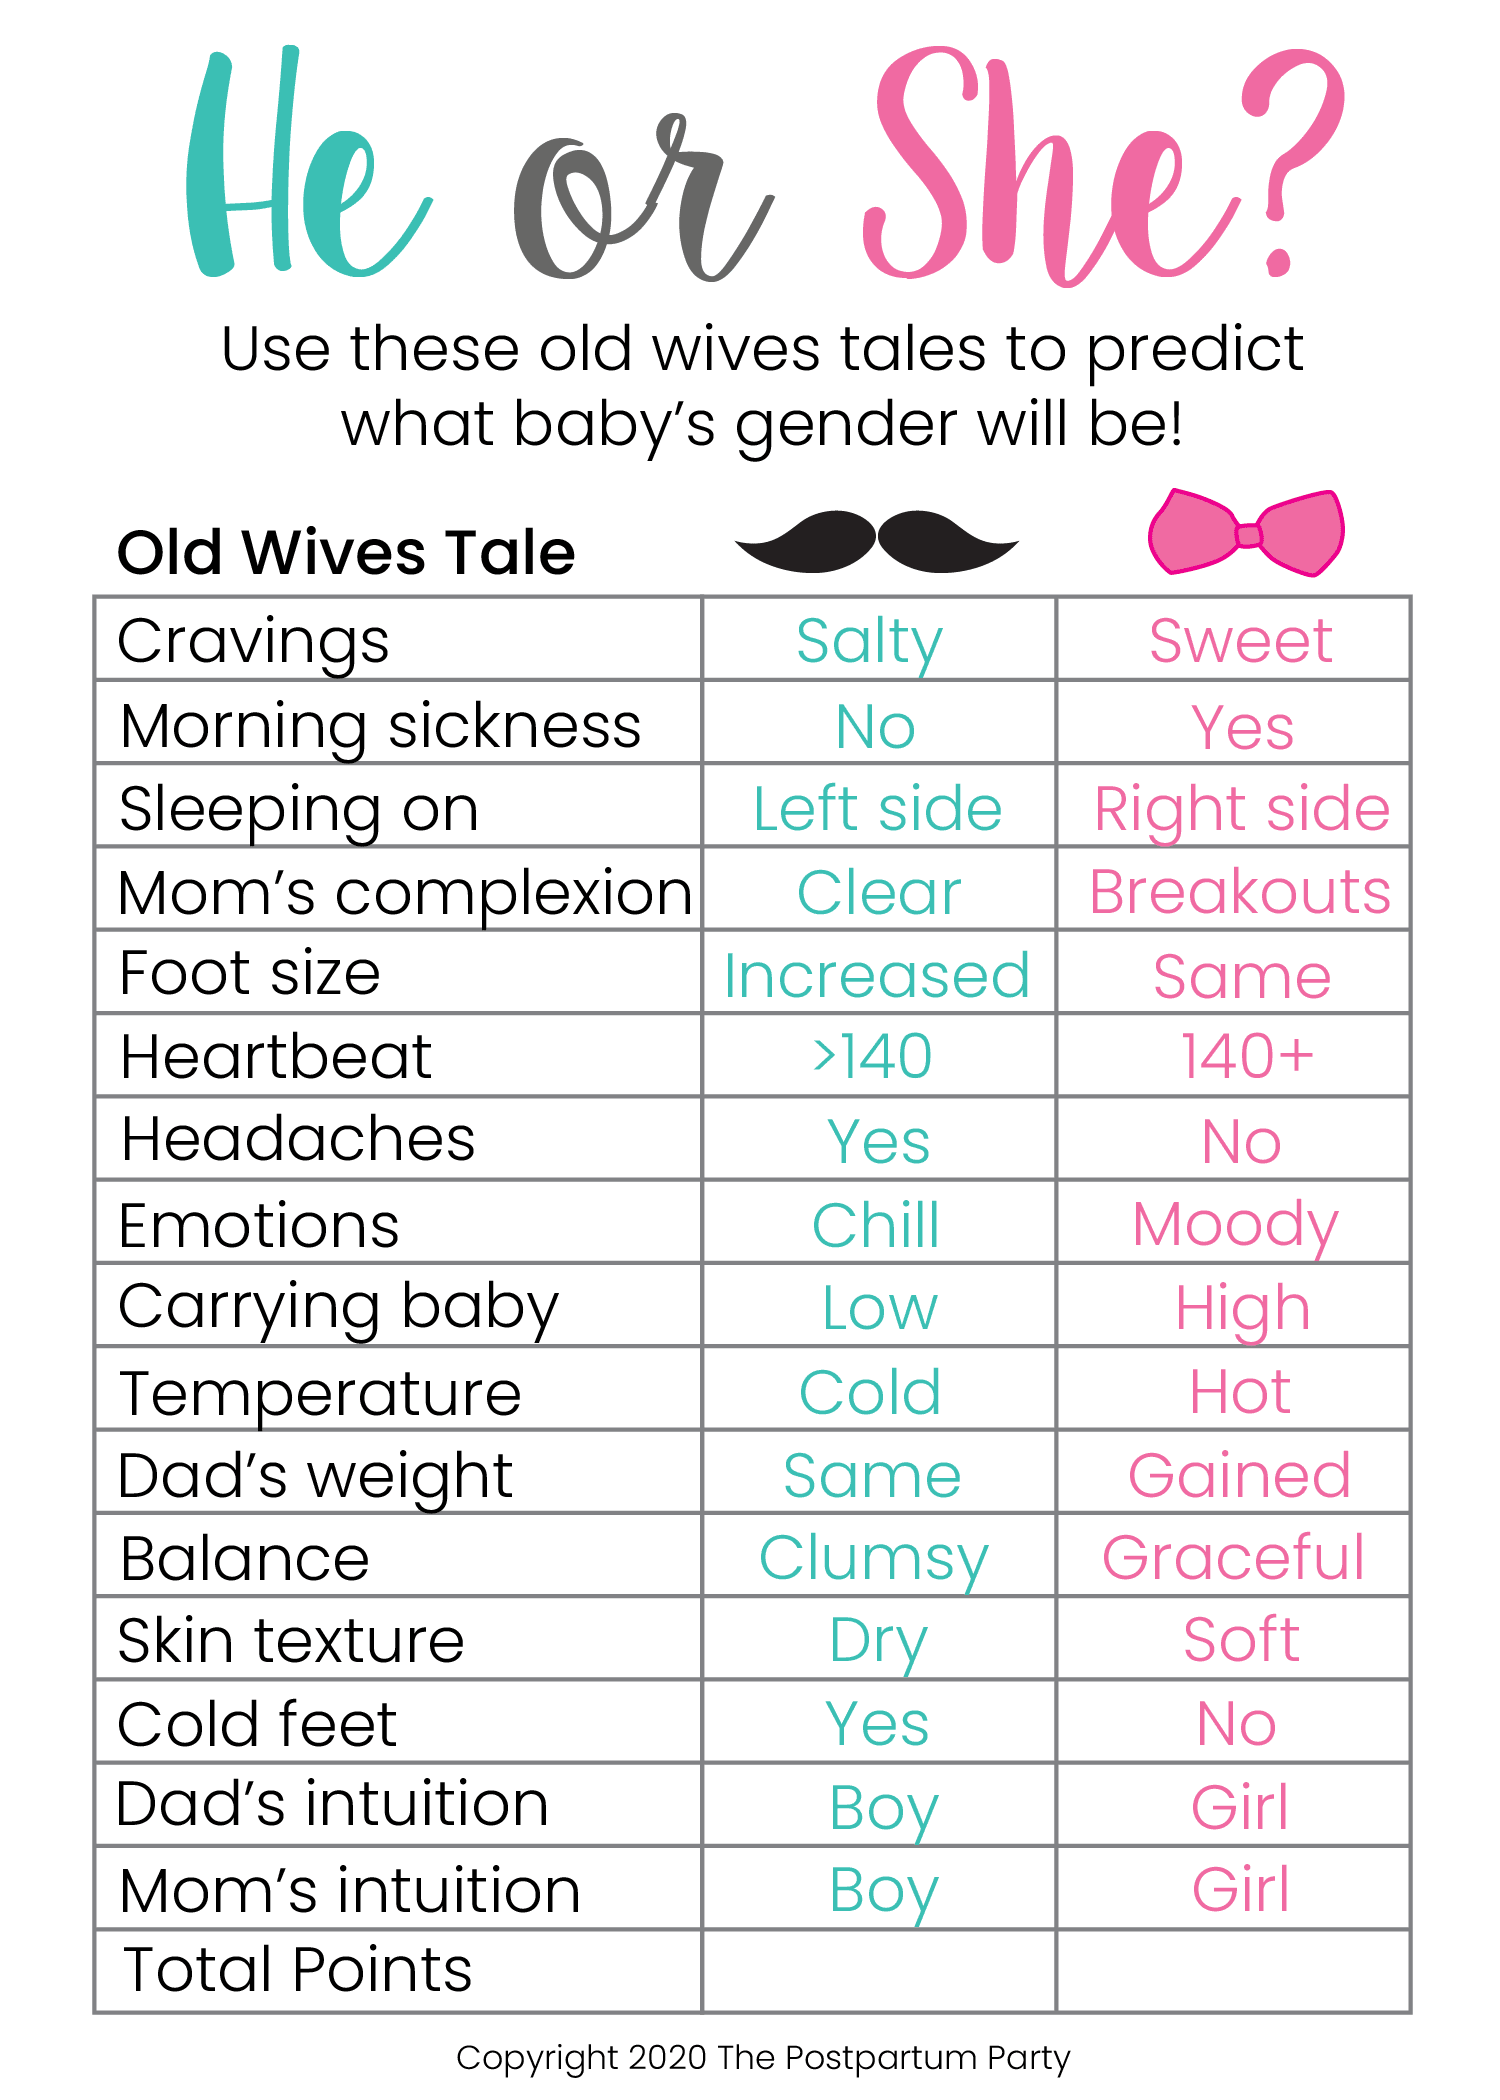 Printable Old Wives Tales Quiz to Predict Baby's Gender - Postpartum Party